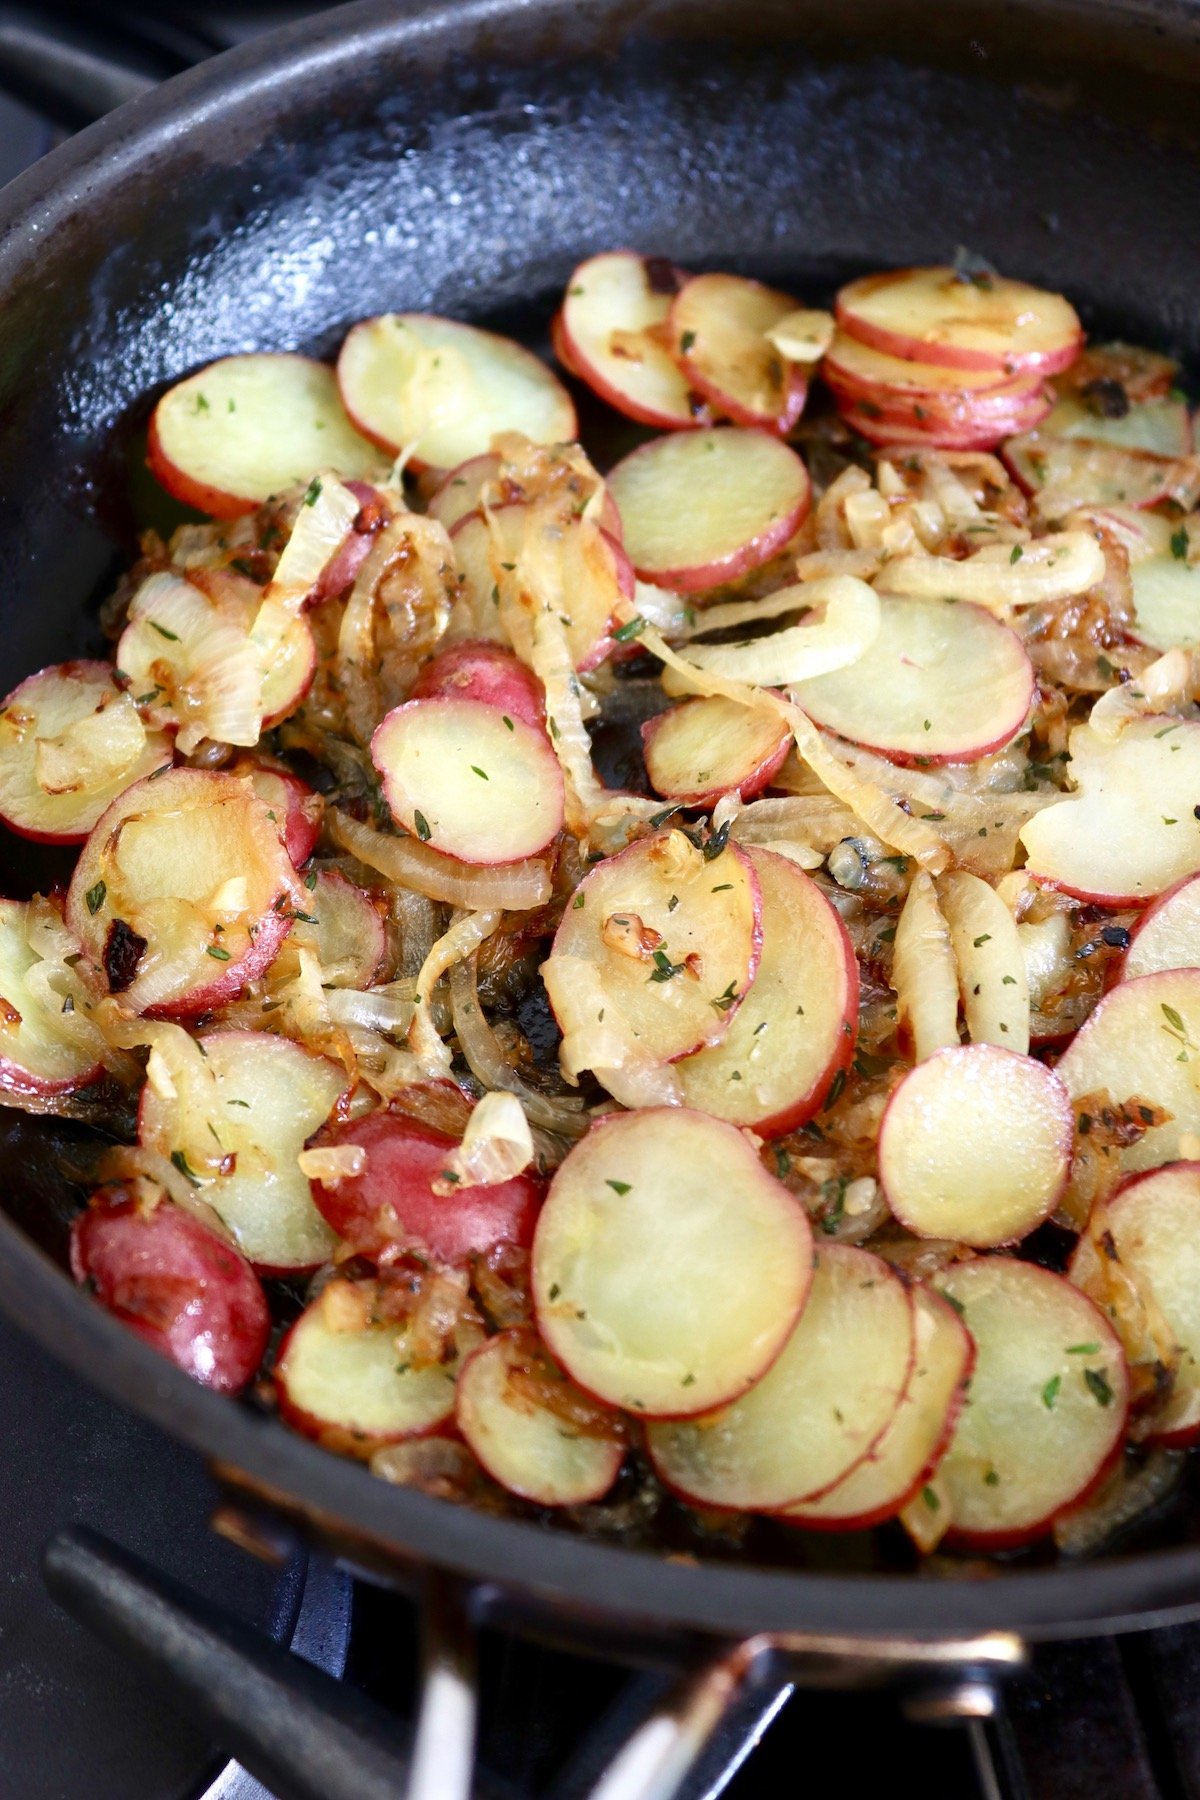 sliced potatoes and caramelized onon in saute pan